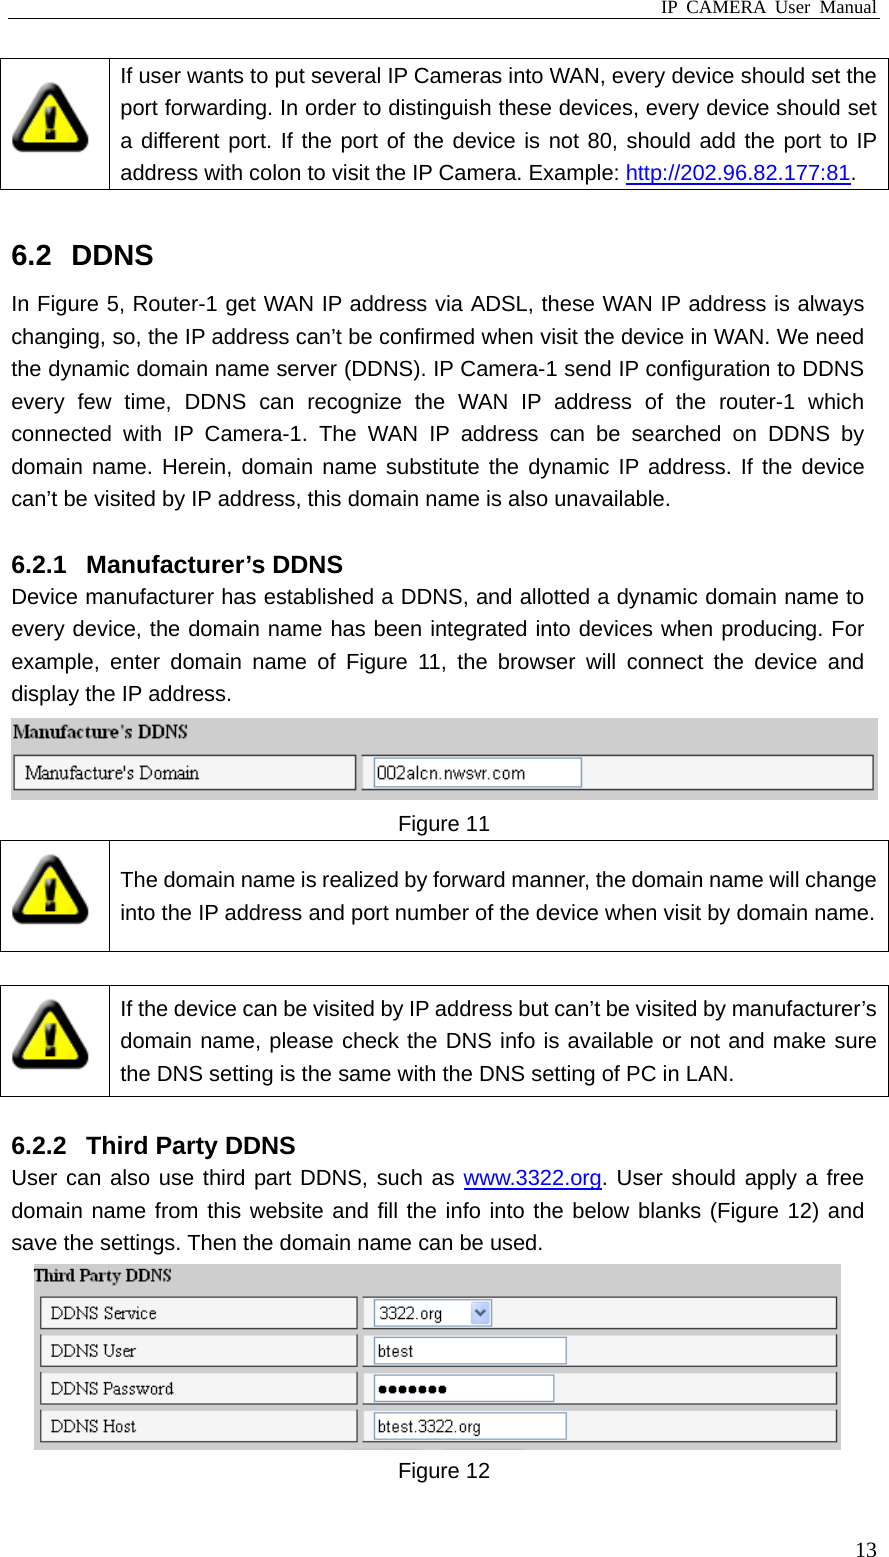 IP CAMERA User Manual  13 If user wants to put several IP Cameras into WAN, every device should set the port forwarding. In order to distinguish these devices, every device should set a different port. If the port of the device is not 80, should add the port to IP address with colon to visit the IP Camera. Example: http://202.96.82.177:81.   6.2 DDNS In Figure 5, Router-1 get WAN IP address via ADSL, these WAN IP address is always changing, so, the IP address can’t be confirmed when visit the device in WAN. We need the dynamic domain name server (DDNS). IP Camera-1 send IP configuration to DDNS every few time, DDNS can recognize the WAN IP address of the router-1 which connected with IP Camera-1. The WAN IP address can be searched on DDNS by domain name. Herein, domain name substitute the dynamic IP address. If the device can’t be visited by IP address, this domain name is also unavailable.  6.2.1 Manufacturer’s DDNS Device manufacturer has established a DDNS, and allotted a dynamic domain name to every device, the domain name has been integrated into devices when producing. For example, enter domain name of Figure 11, the browser will connect the device and display the IP address.  Figure 11  The domain name is realized by forward manner, the domain name will change into the IP address and port number of the device when visit by domain name.  If the device can be visited by IP address but can’t be visited by manufacturer’s domain name, please check the DNS info is available or not and make sure the DNS setting is the same with the DNS setting of PC in LAN.  6.2.2  Third Party DDNS User can also use third part DDNS, such as www.3322.org. User should apply a free domain name from this website and fill the info into the below blanks (Figure 12) and save the settings. Then the domain name can be used.  Figure 12 